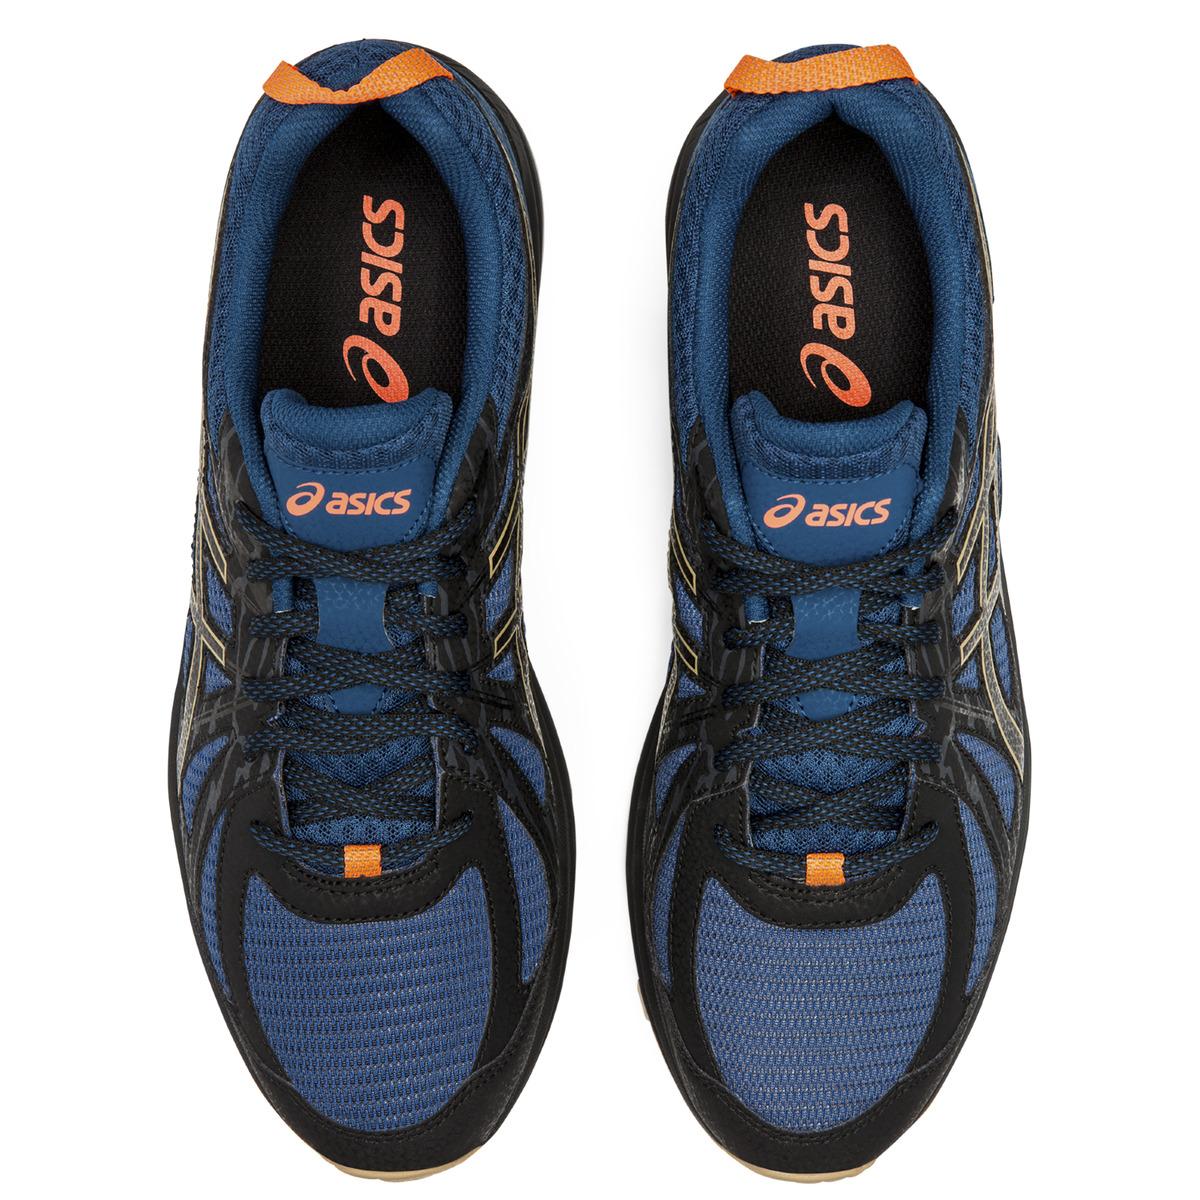 asics frequent trail blue